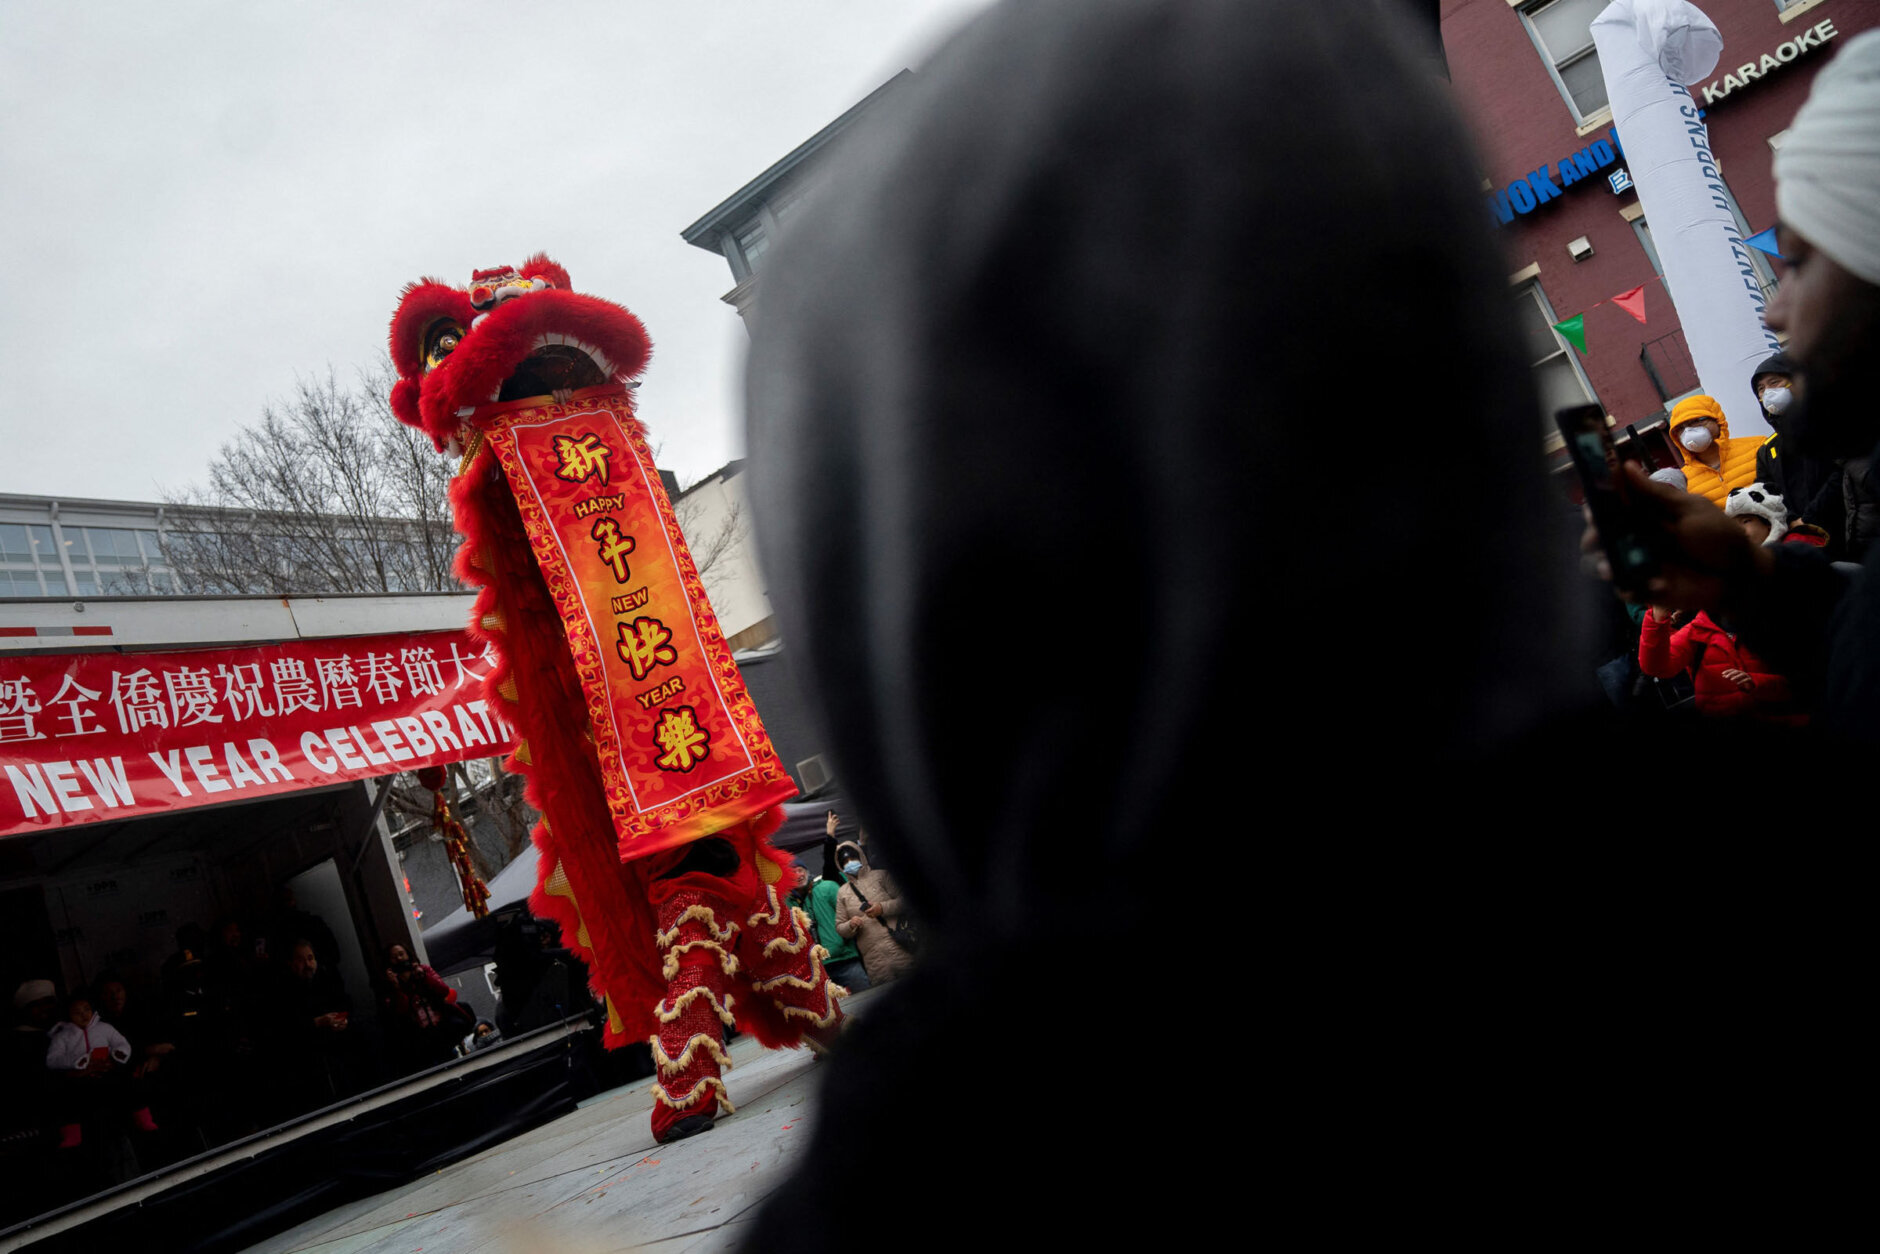 Onlookers watch performers on stage following the Lunar New Year Parade in the Chinatown neighborhood of Washington, DC, on January 22, 2023. - 2023 is the year of the rabbit in the Chinese horoscope. (Photo by Stefani Reynolds / AFP) (Photo by STEFANI REYNOLDS/AFP via Getty Images)